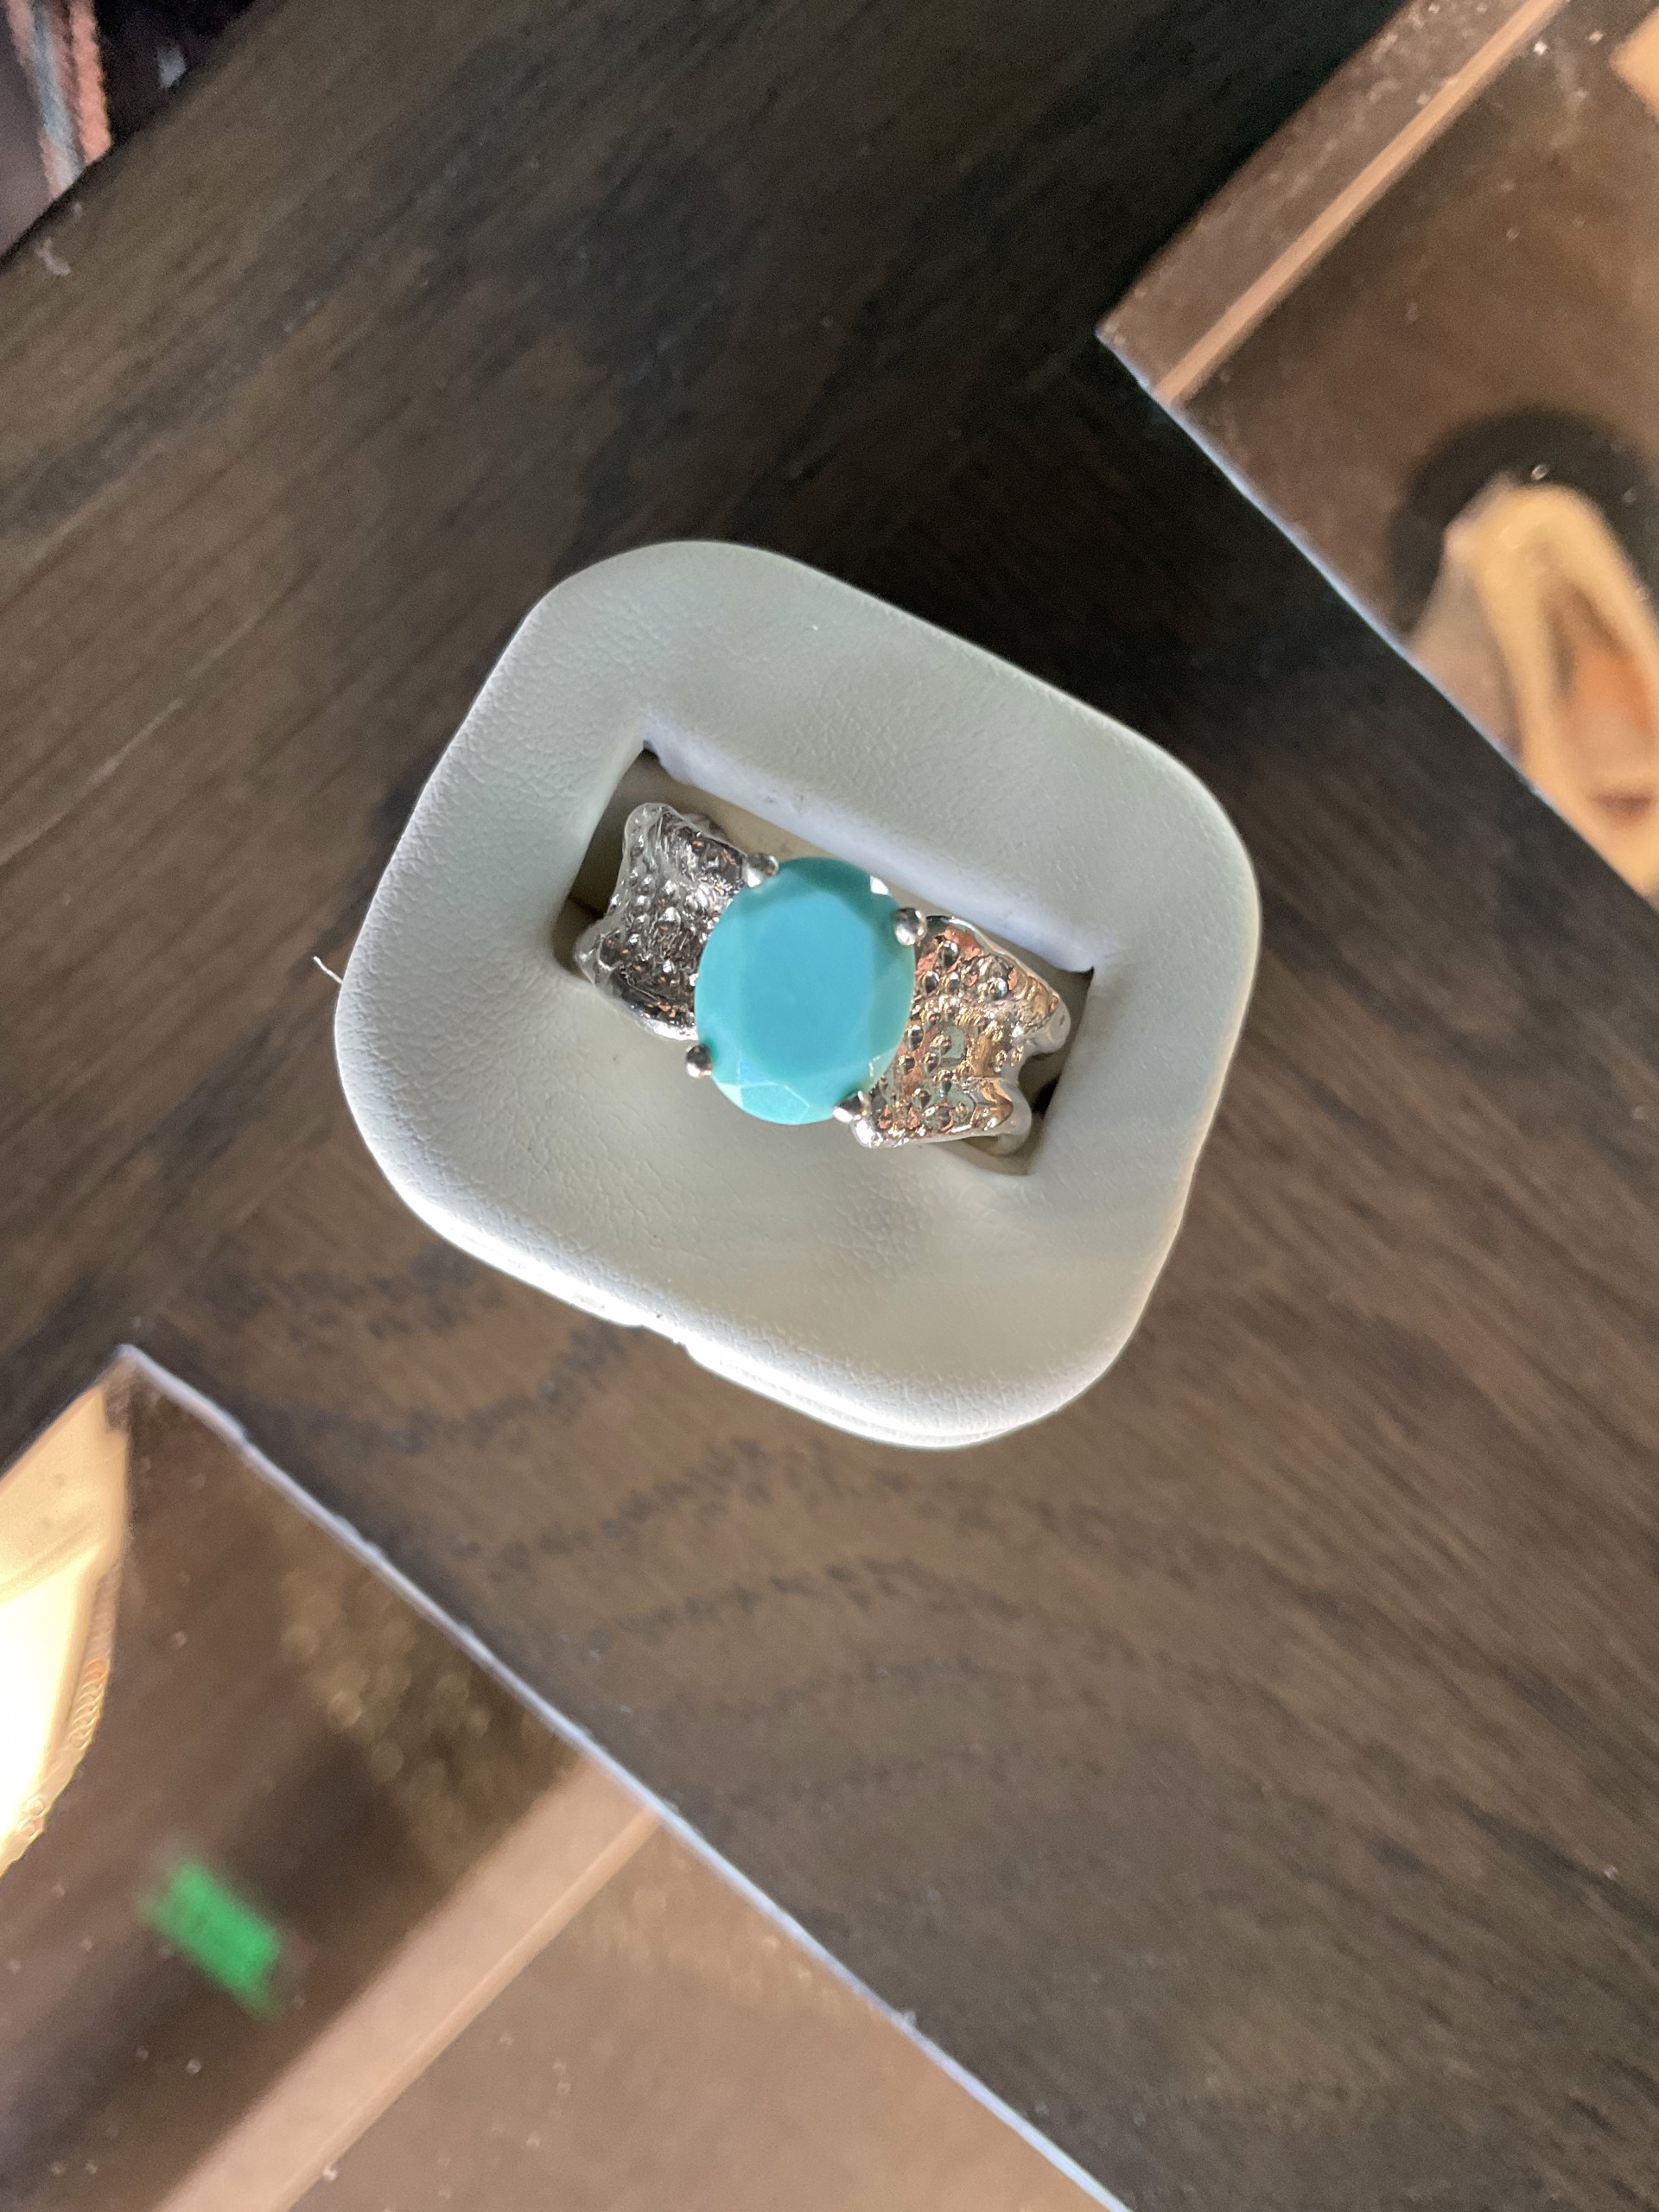 Ripple Ring- Turquoise by Kristen Baird